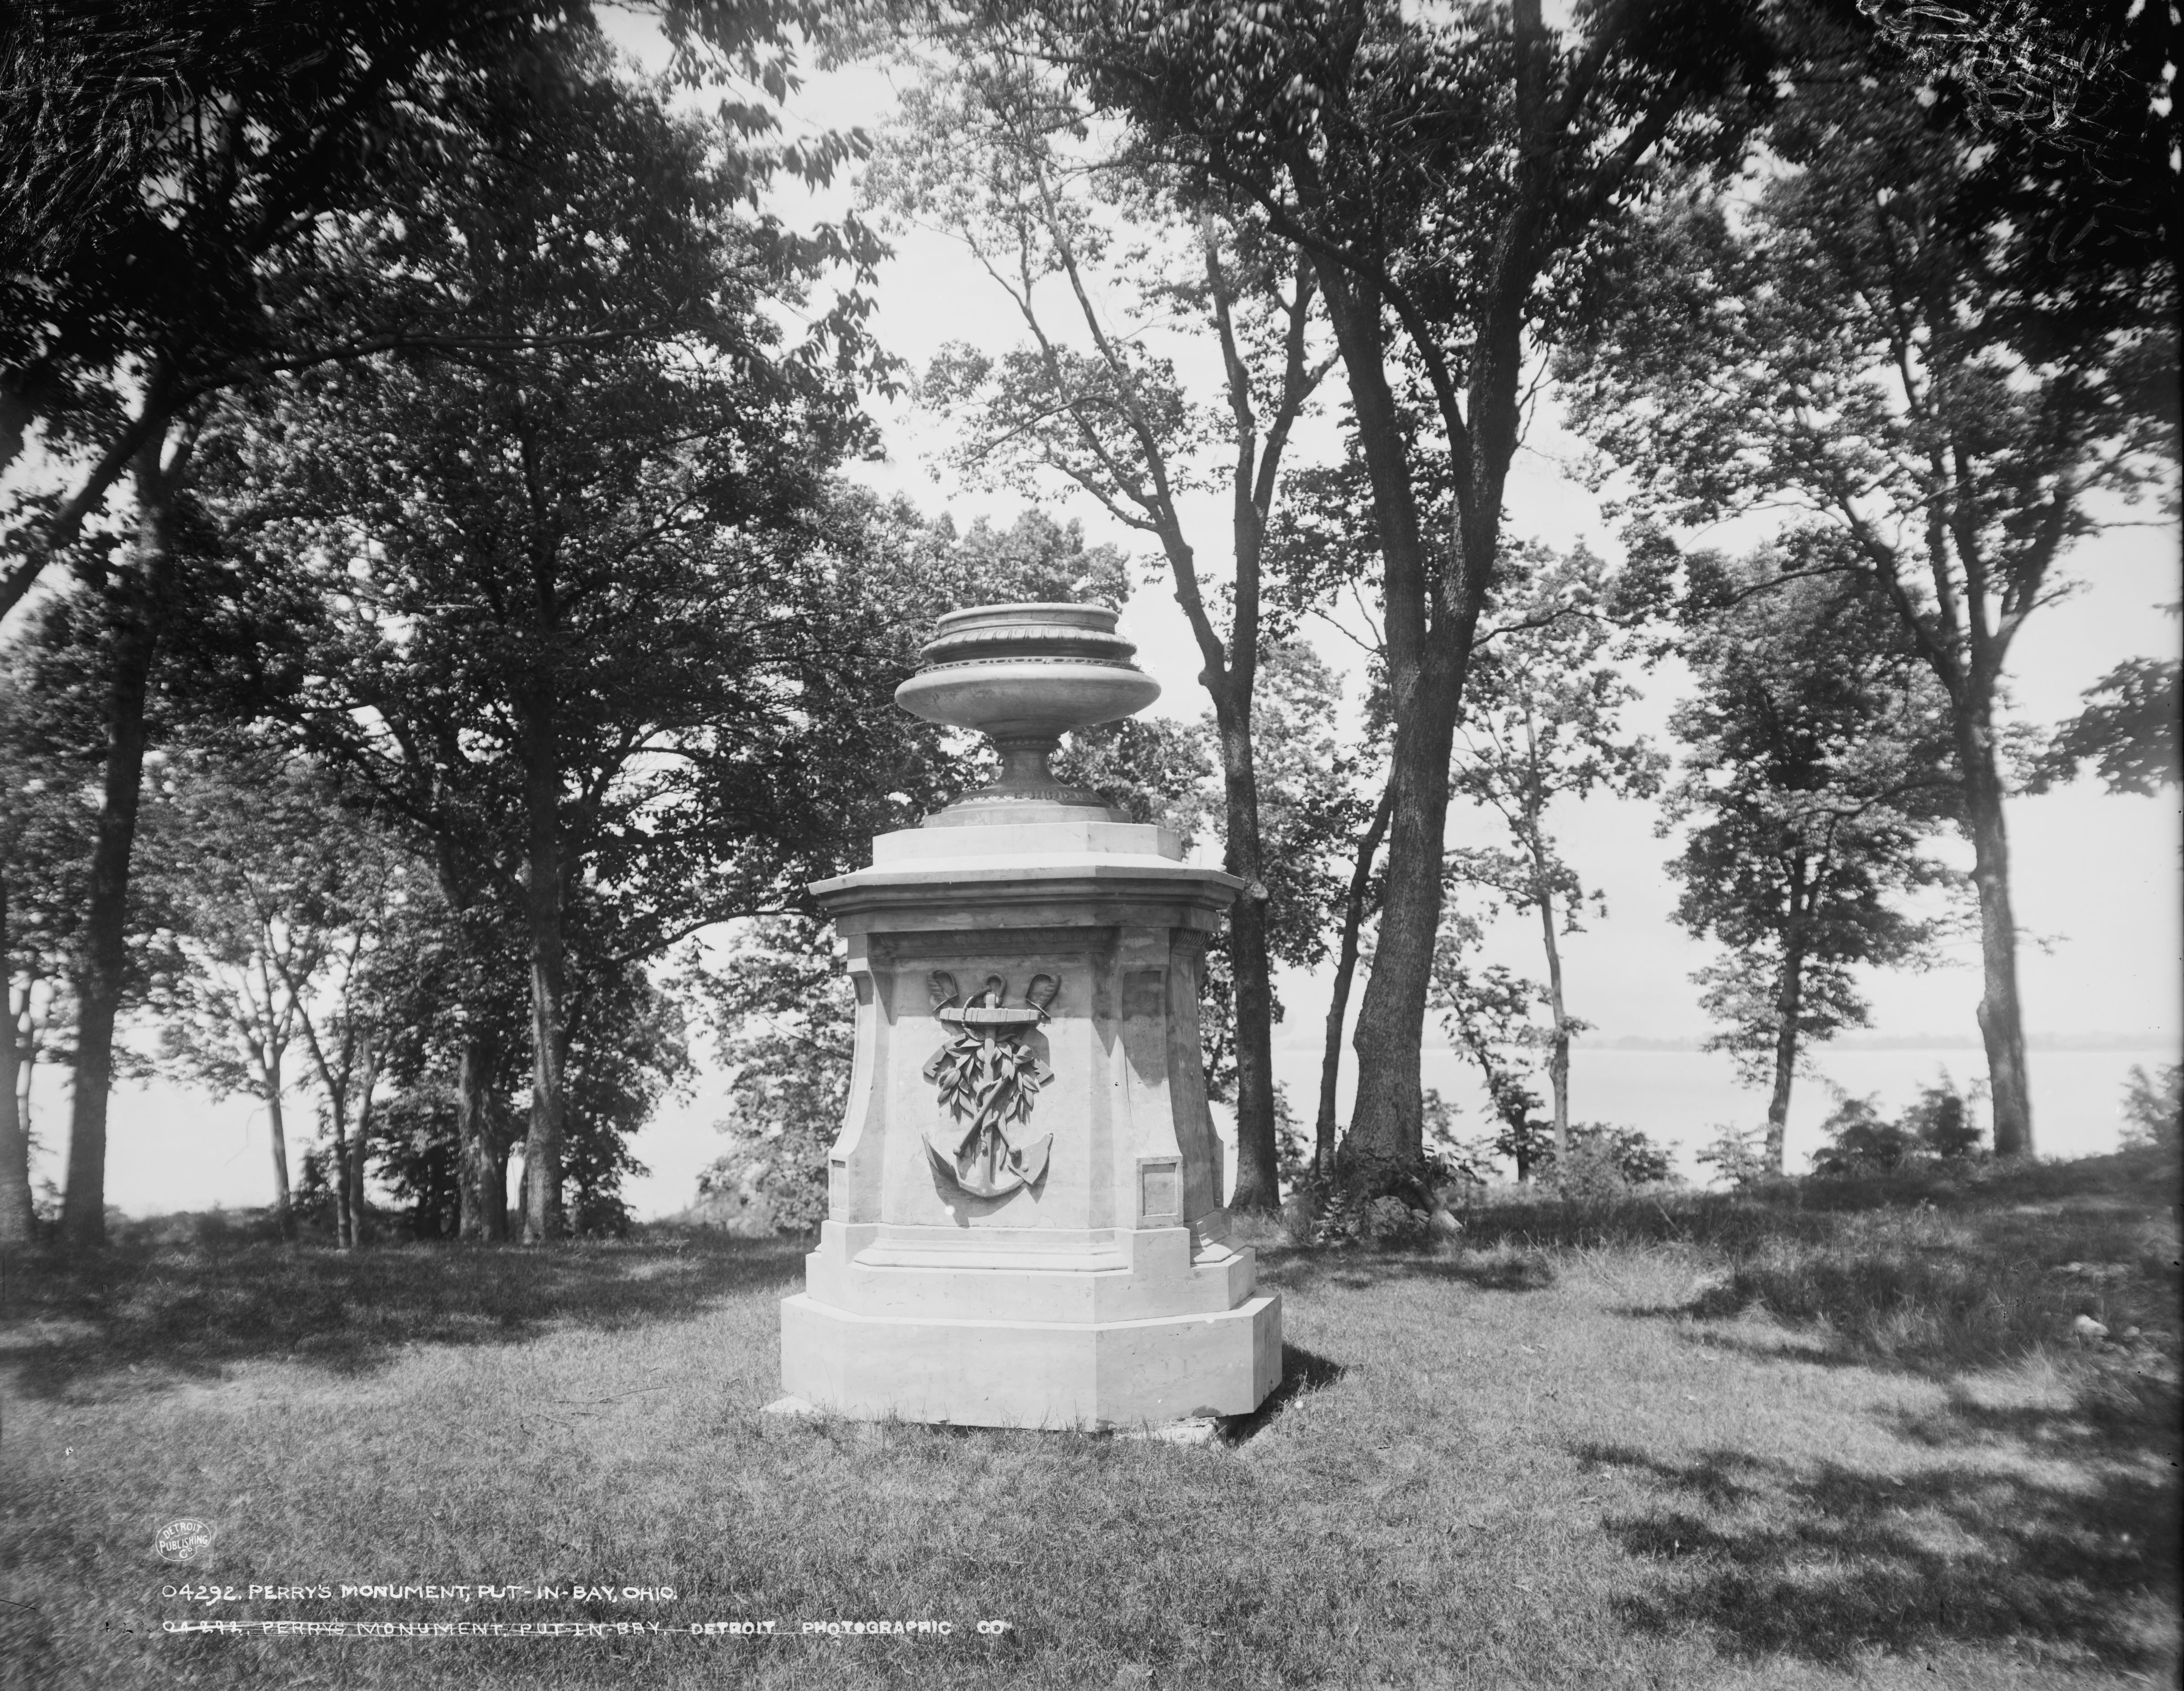 The Perry Monument in Put-in-Bay, Ohio